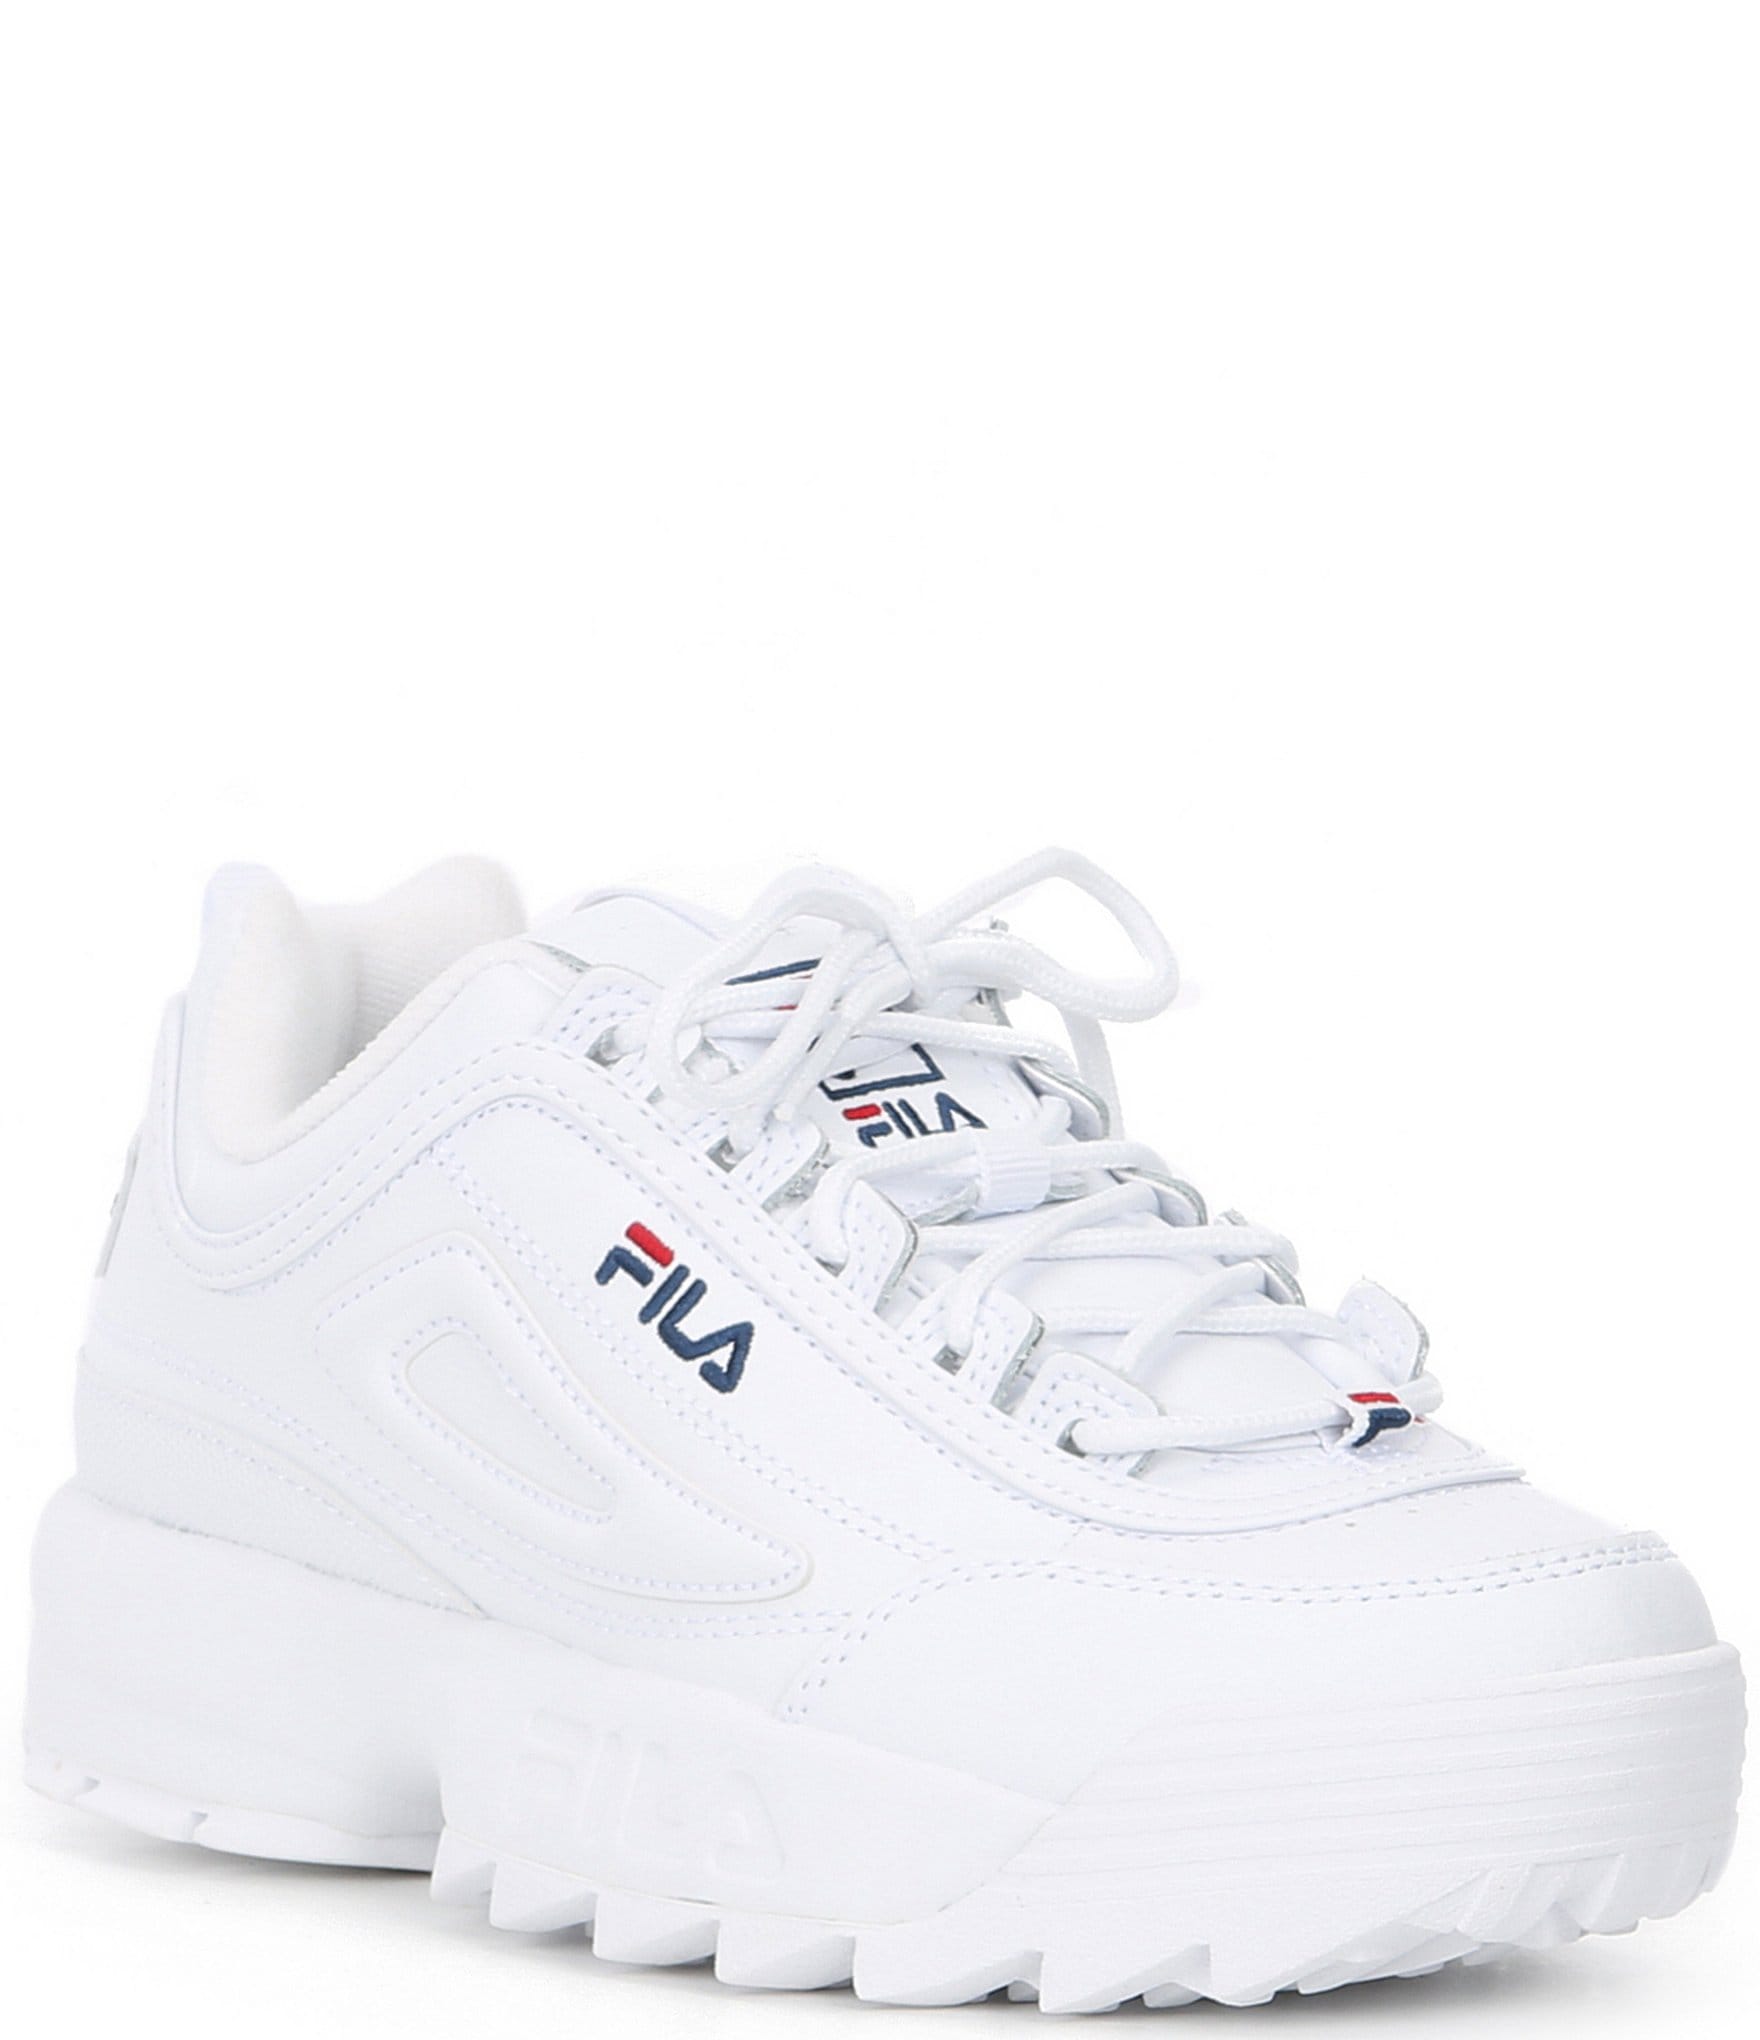 Are Fila Workout Shoes?